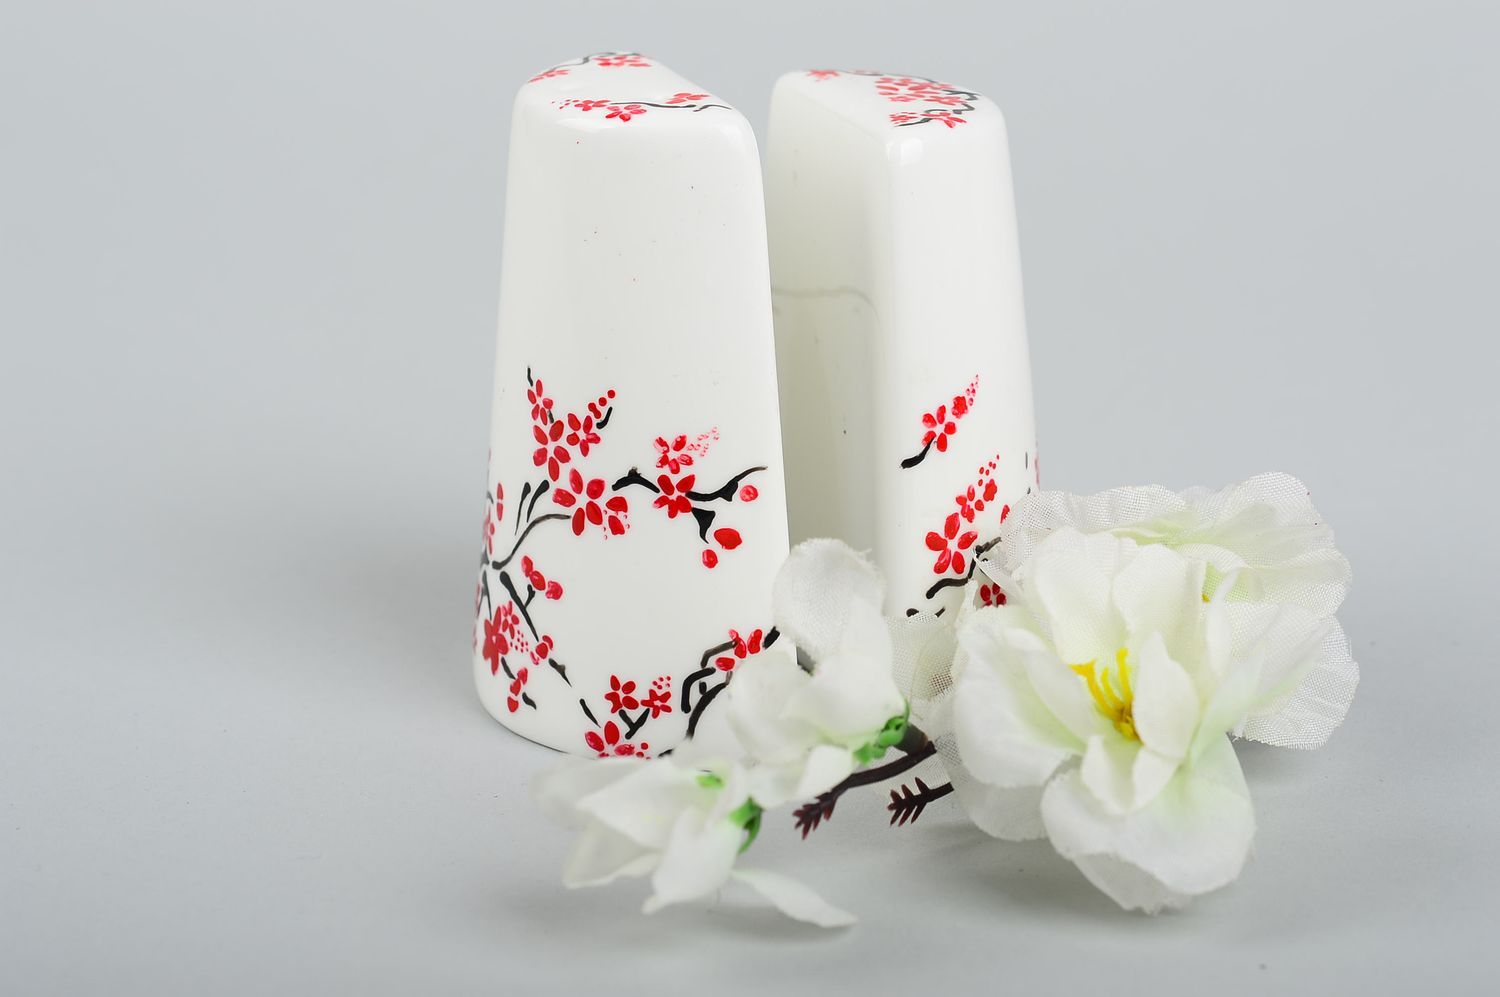 Handmade painted ceramic salt and pepper shakers home goods the kitchen photo 1